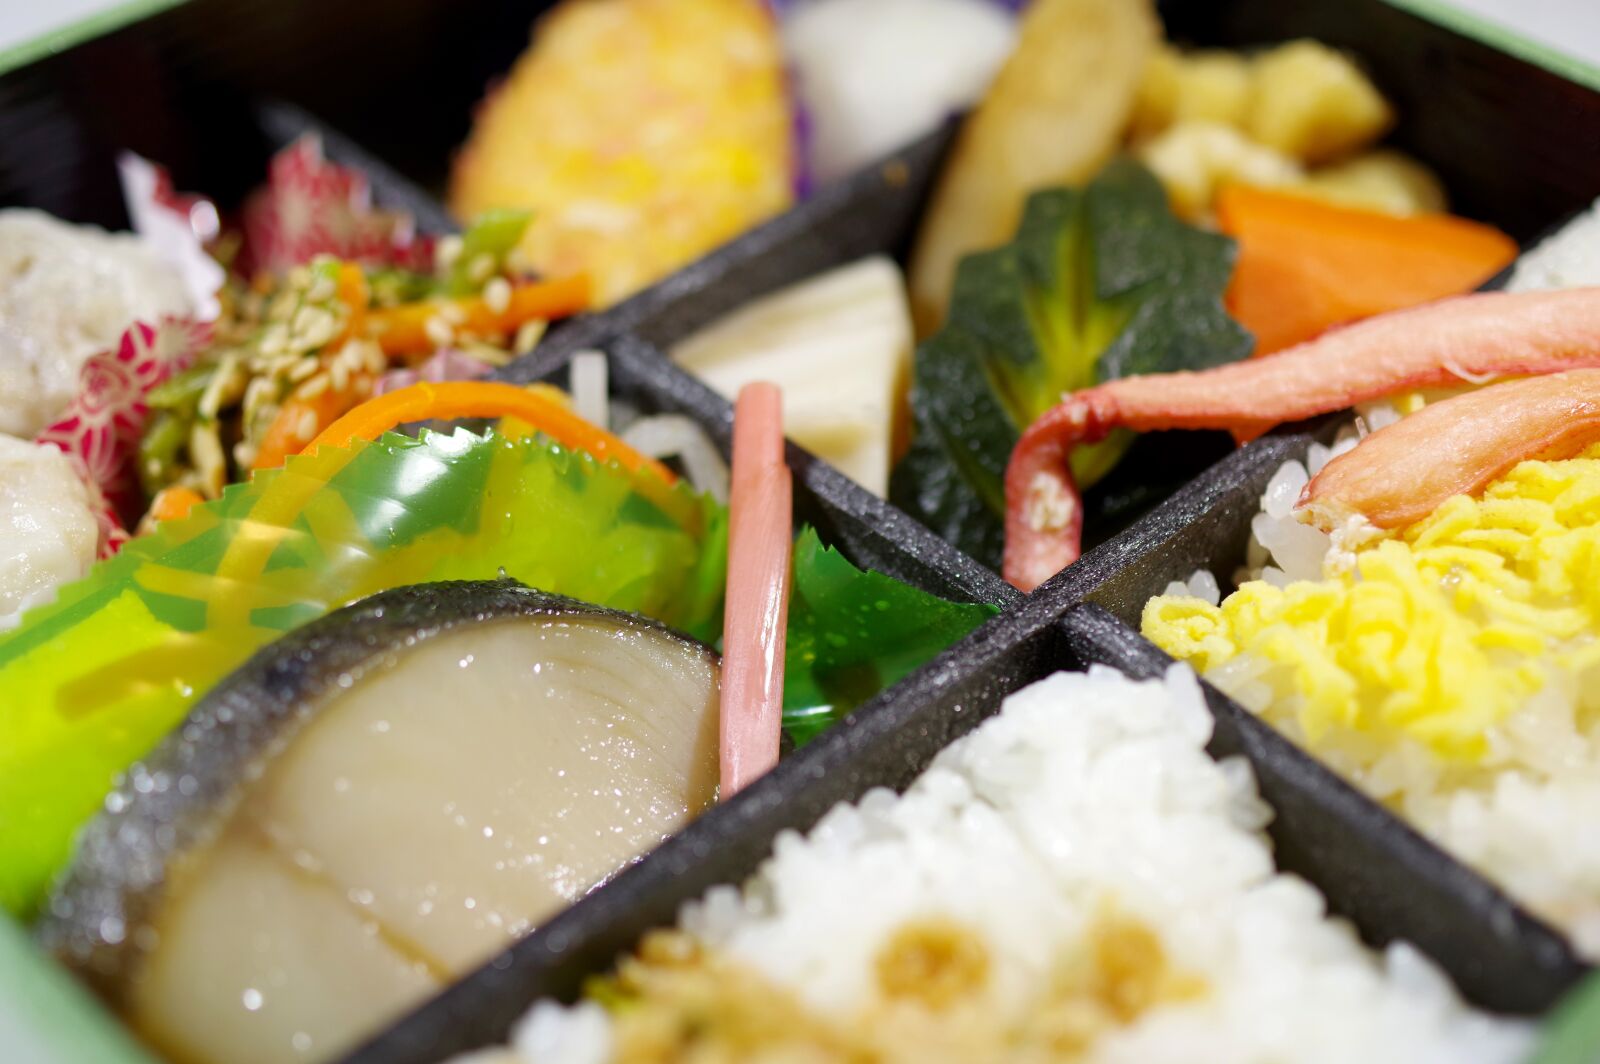 Pentax KP sample photo. Lunch box, japanese food photography